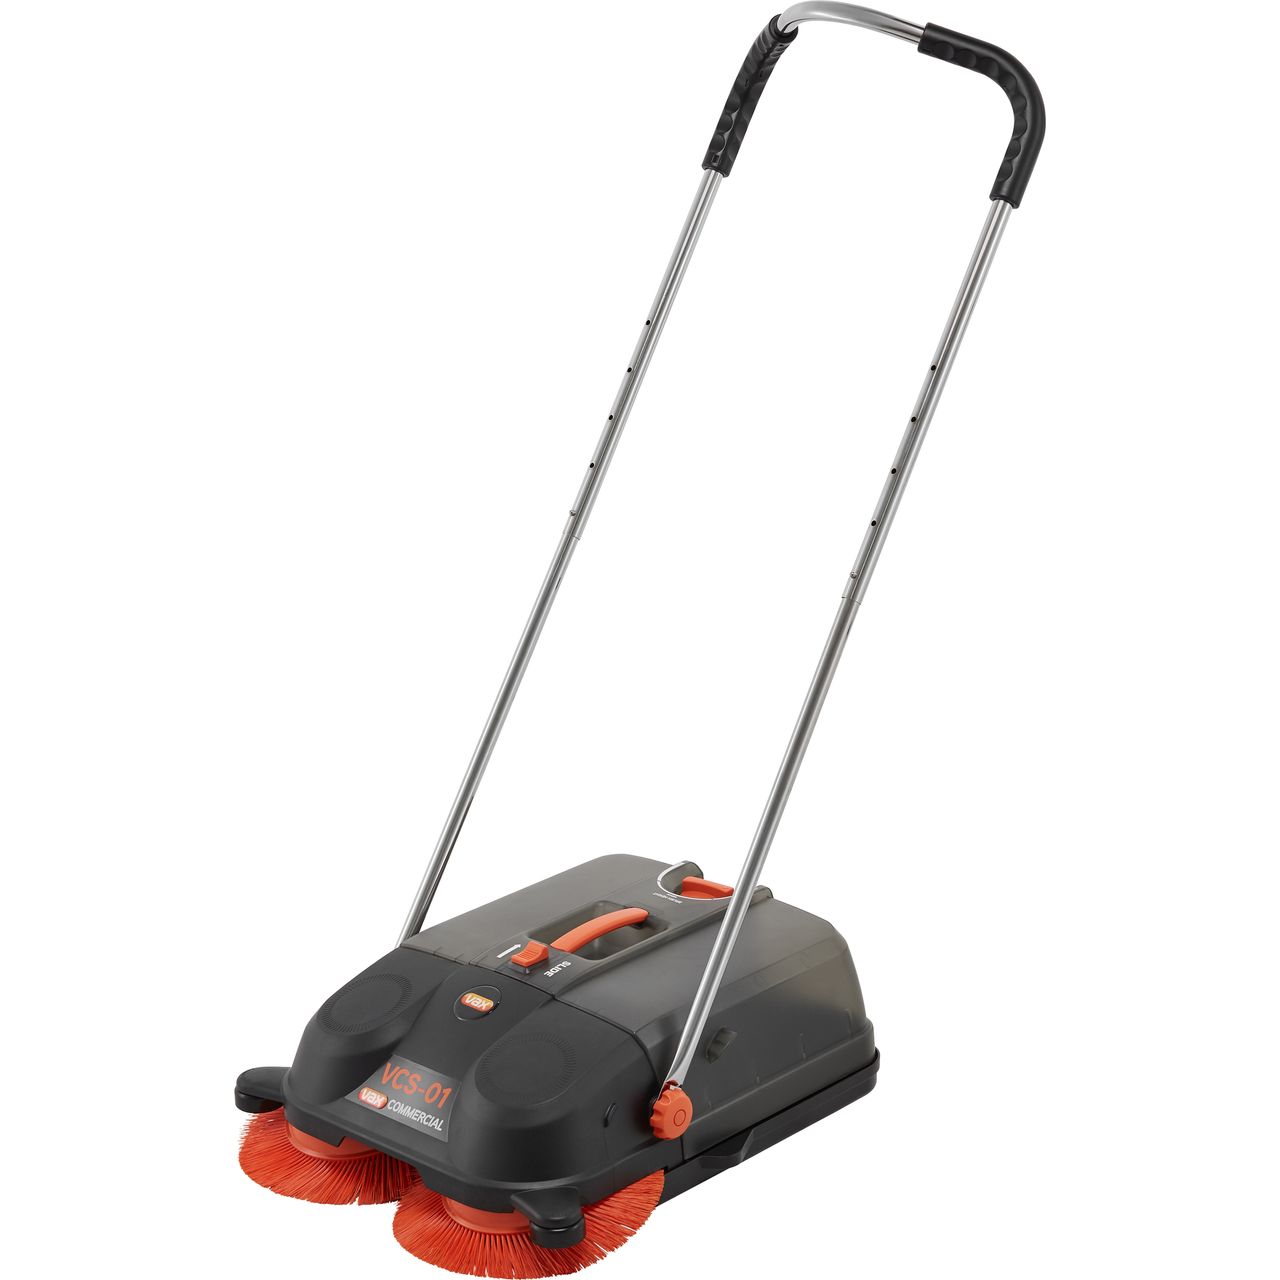 Vax Sweeper VCS01 Hard Floor Cleaner Review